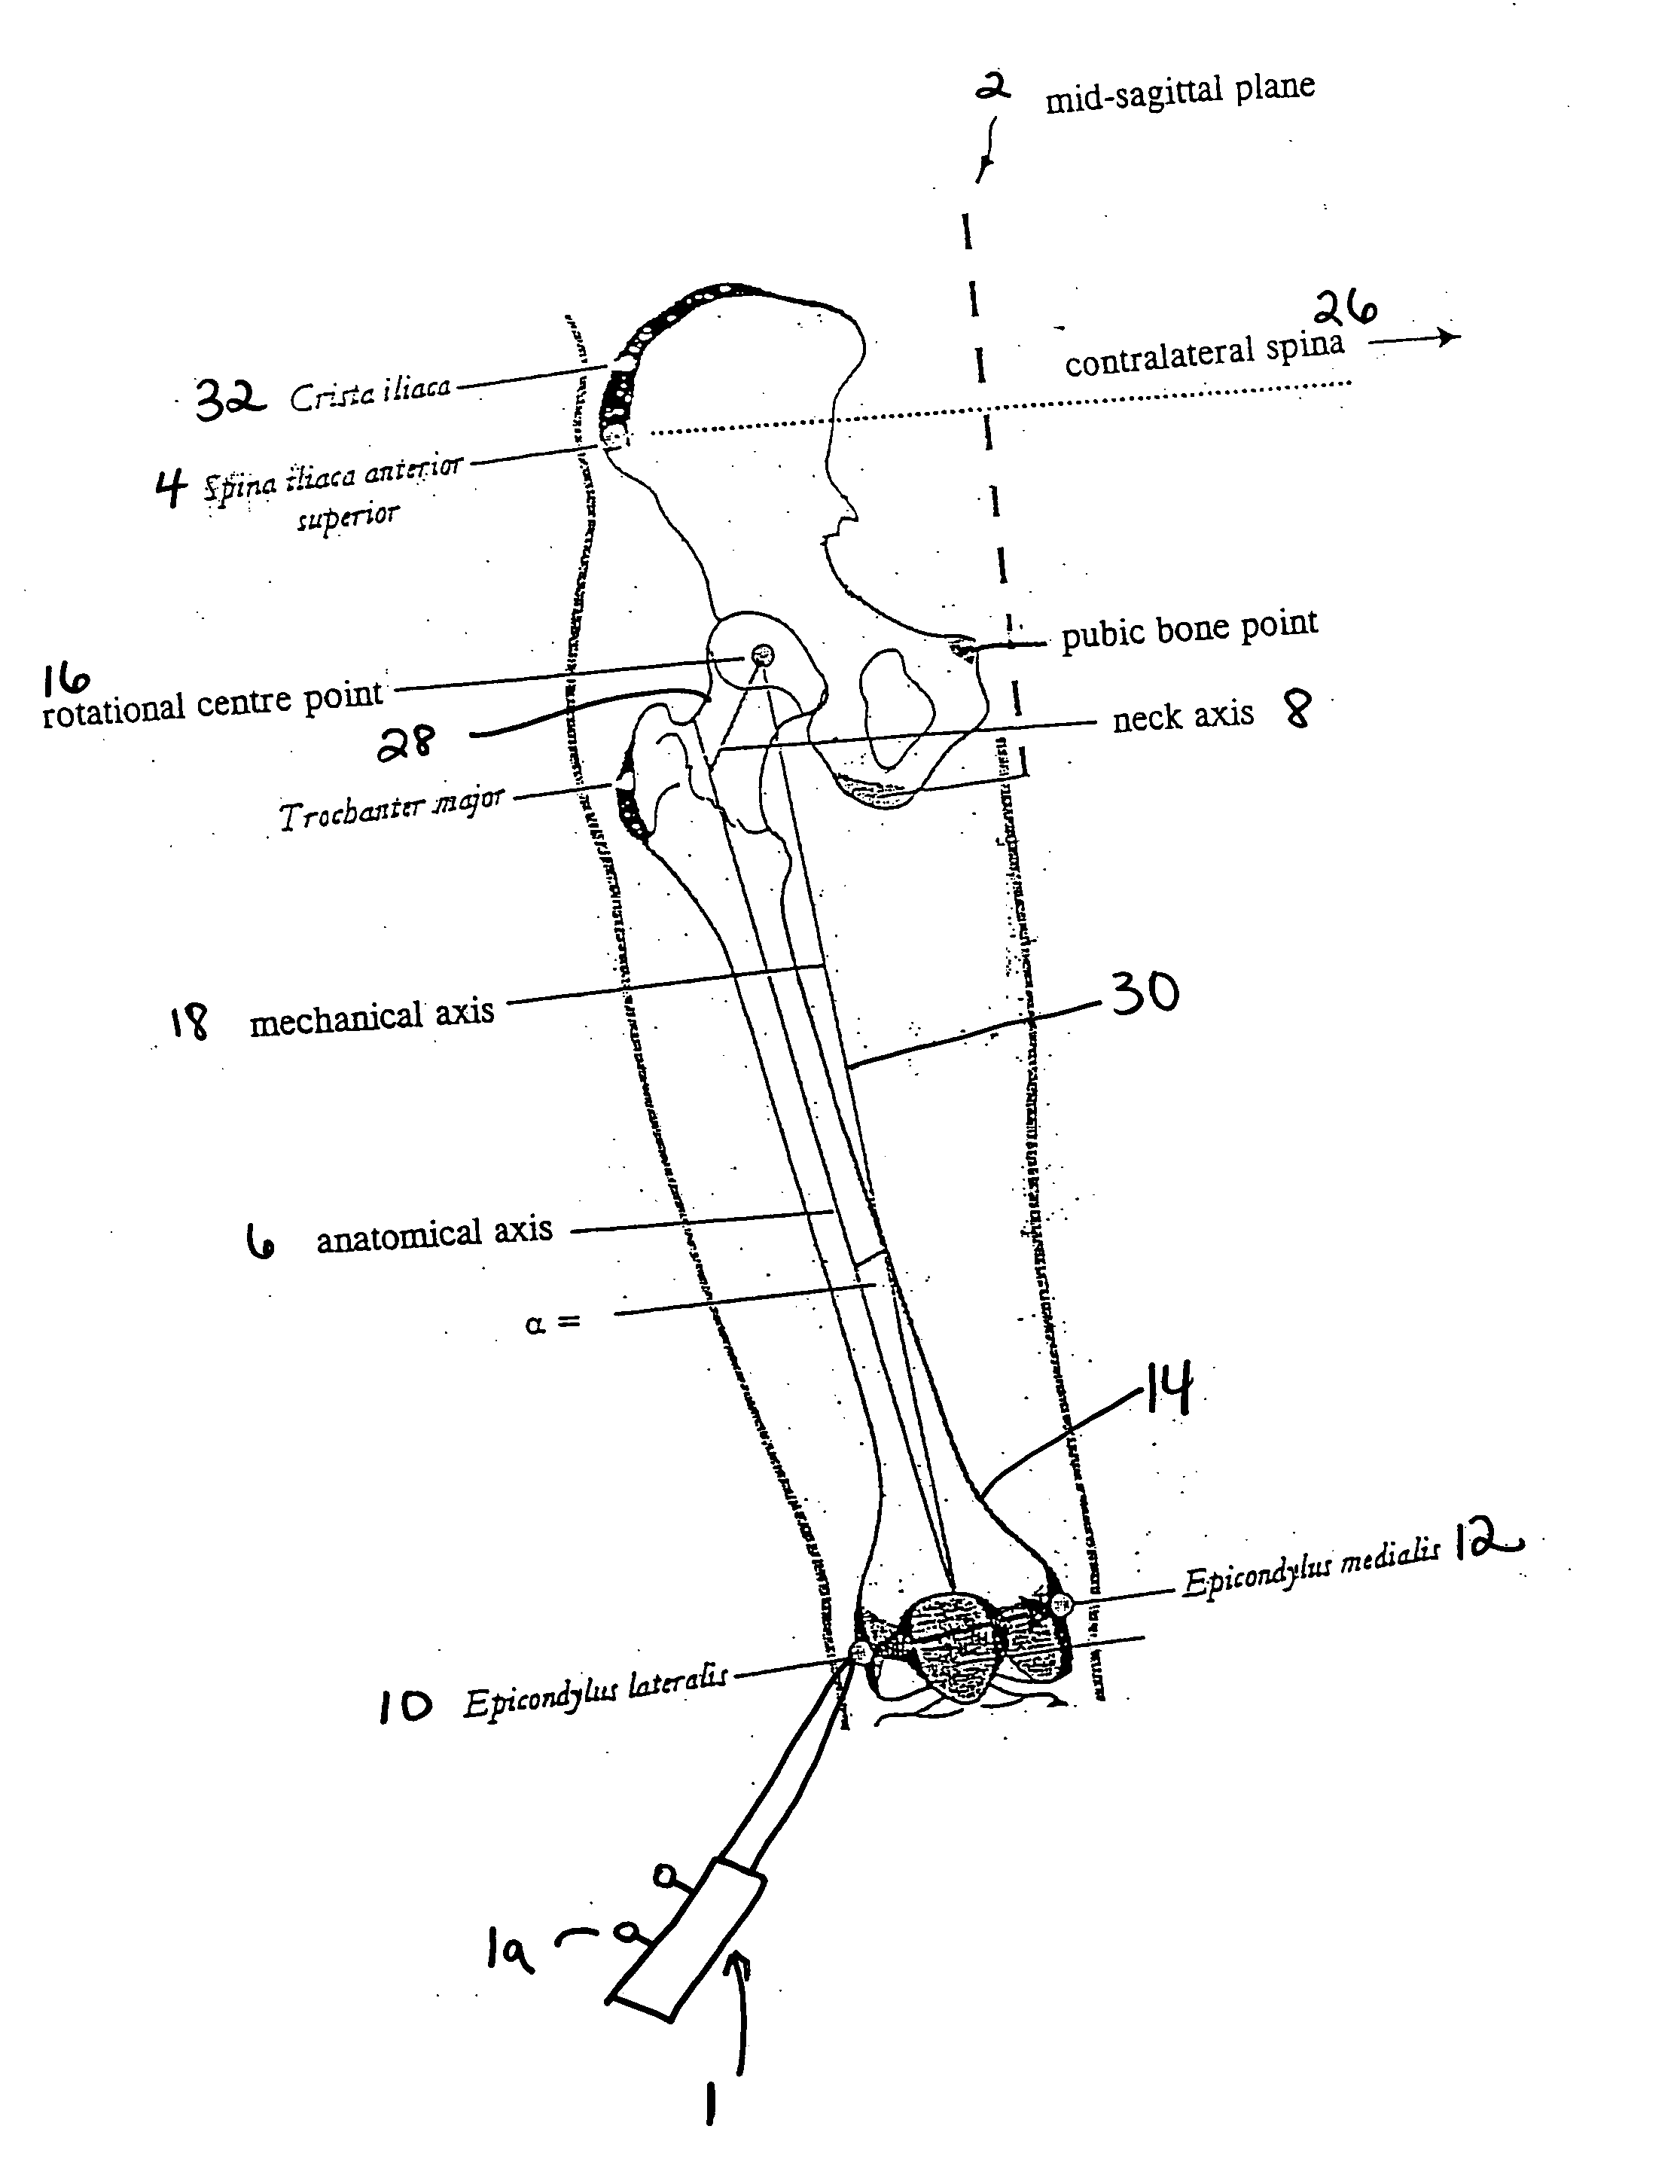 Method and system for generating three-dimensional model of part of a body from fluoroscopy image data and specific landmarks